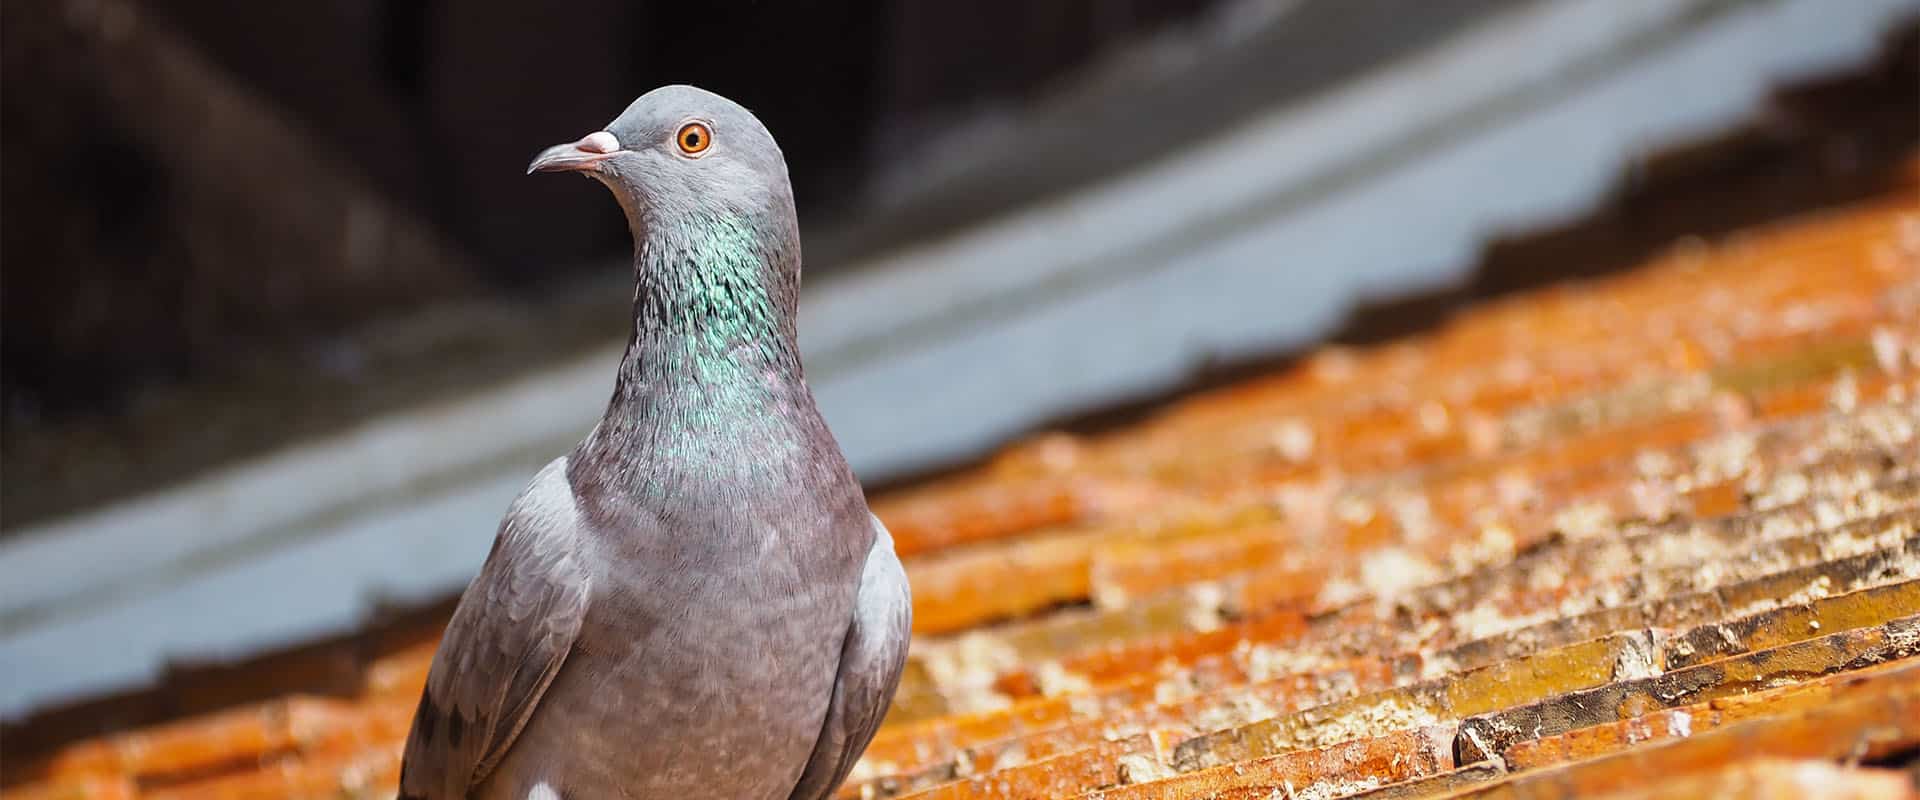 Pigeon and disease communicable to humans